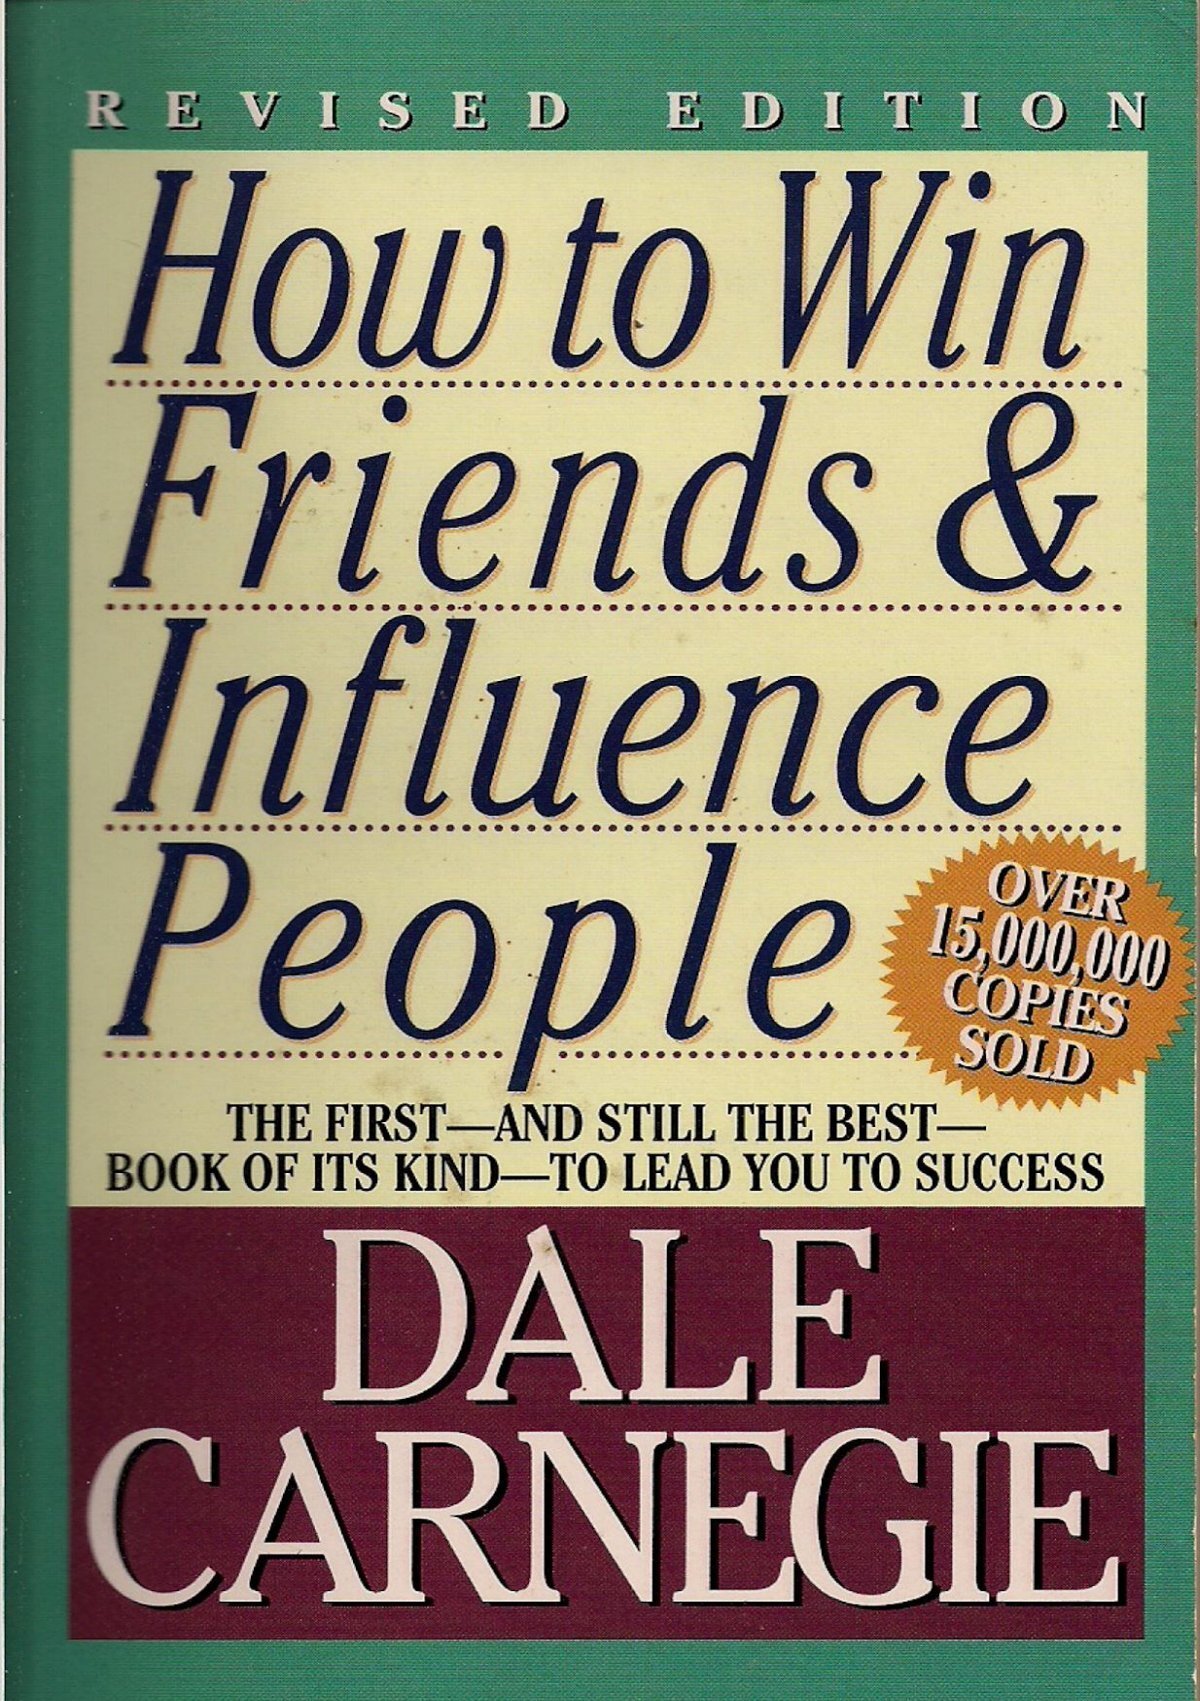 Original Dale Carnegie Poster in his own words. Image made of Dale Car –  FIGURES OF SPEECH